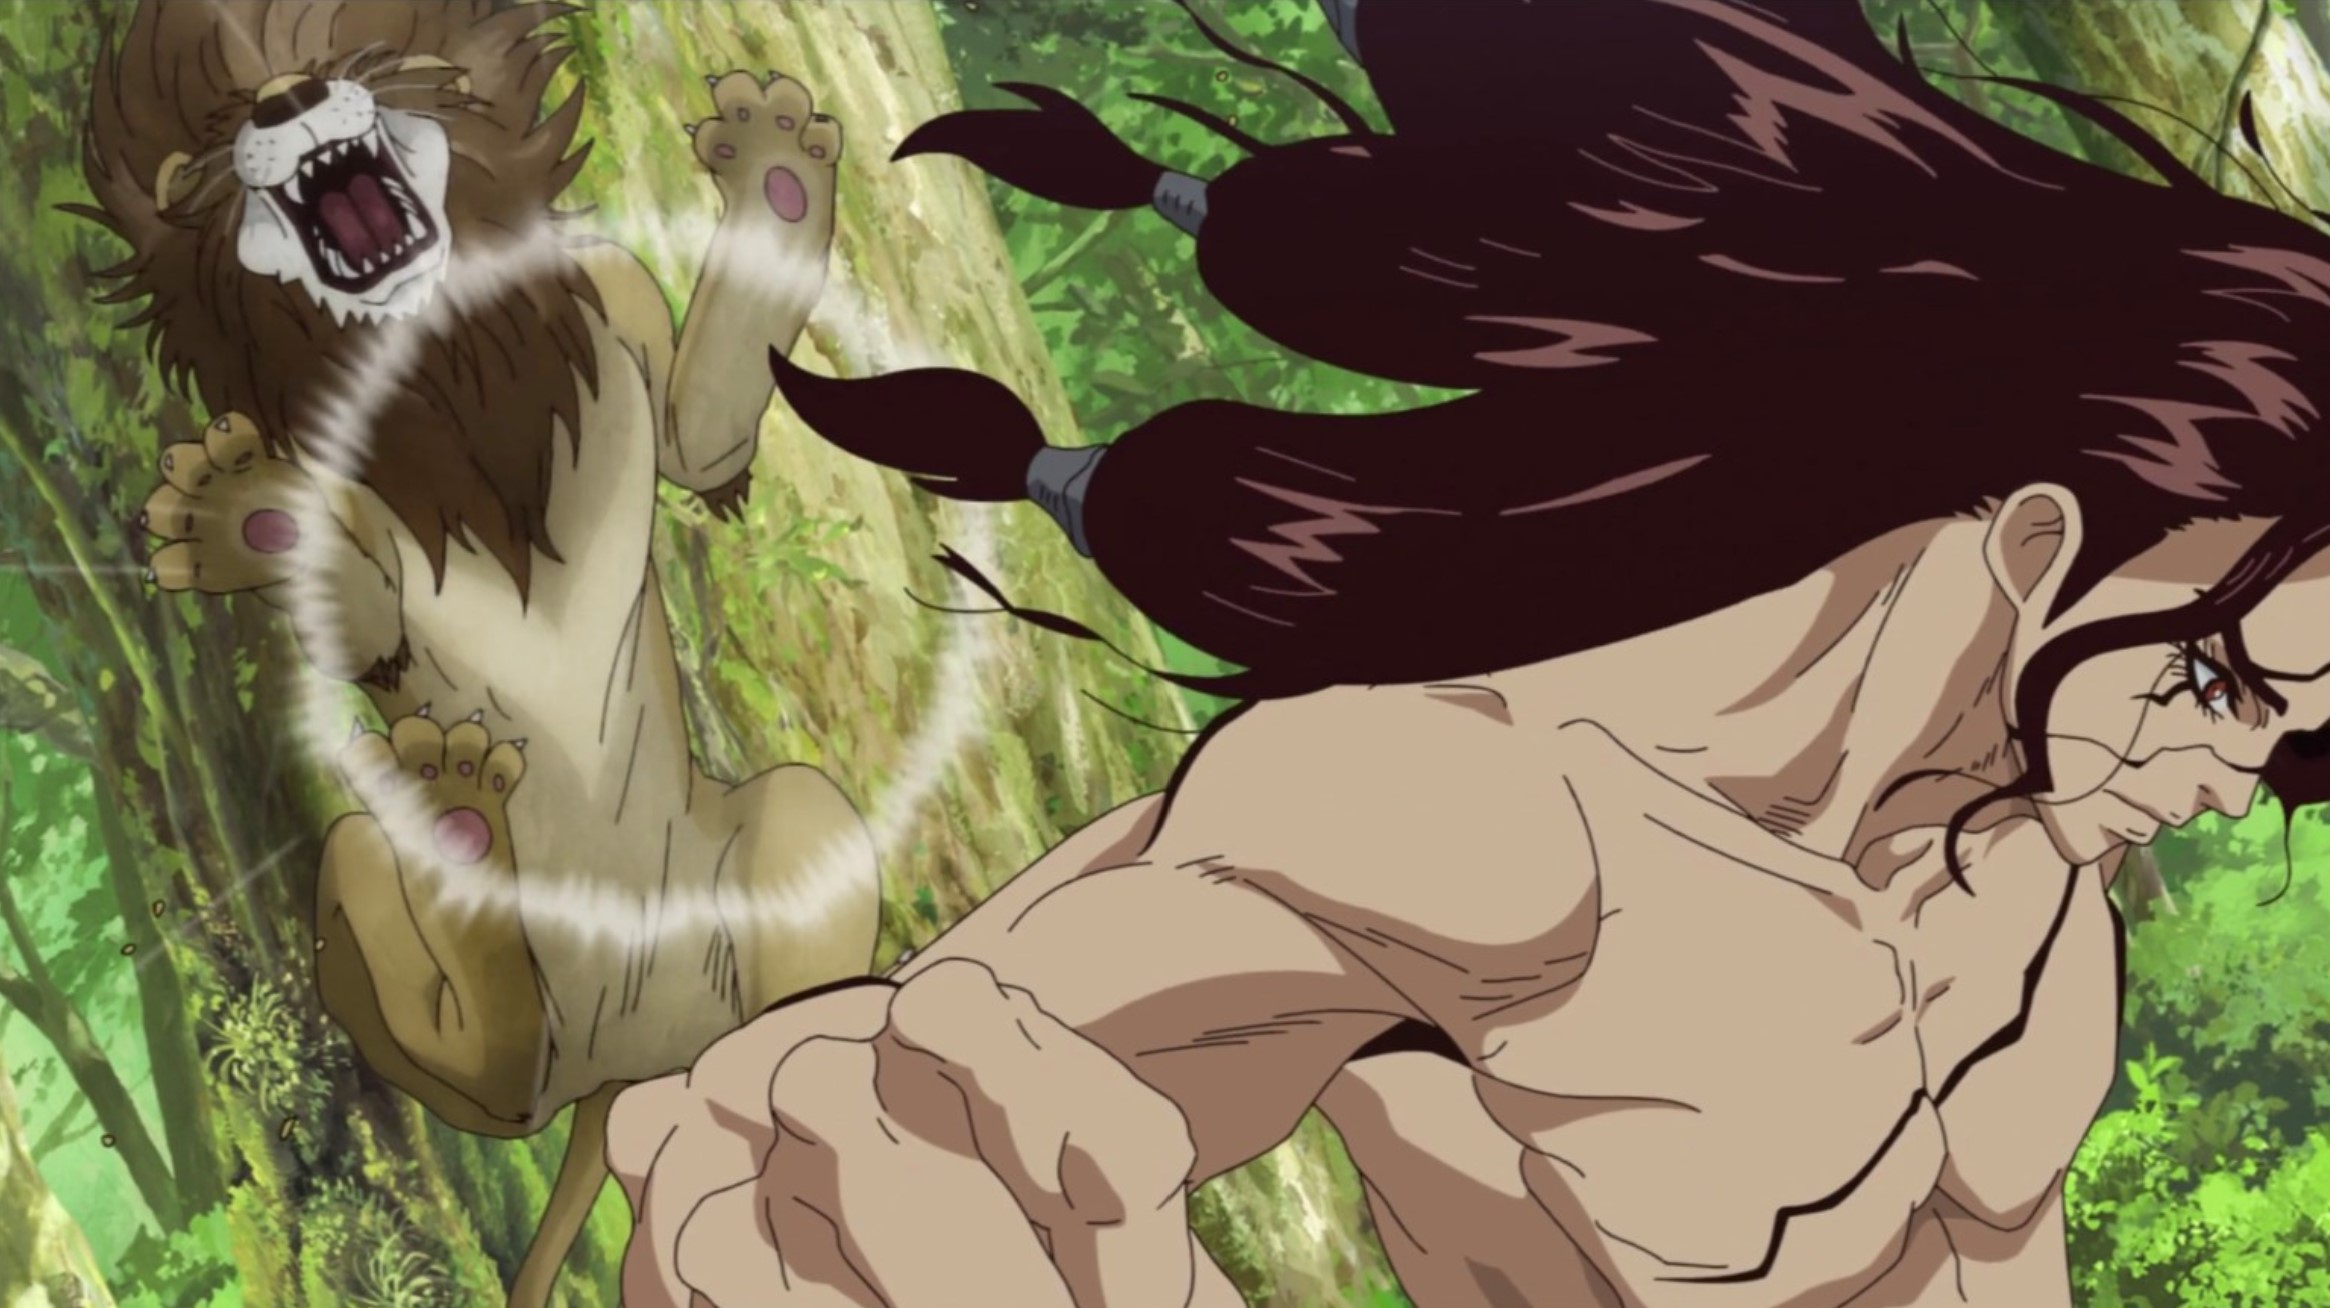 Tsukasa punches a lion, sending it flying. 